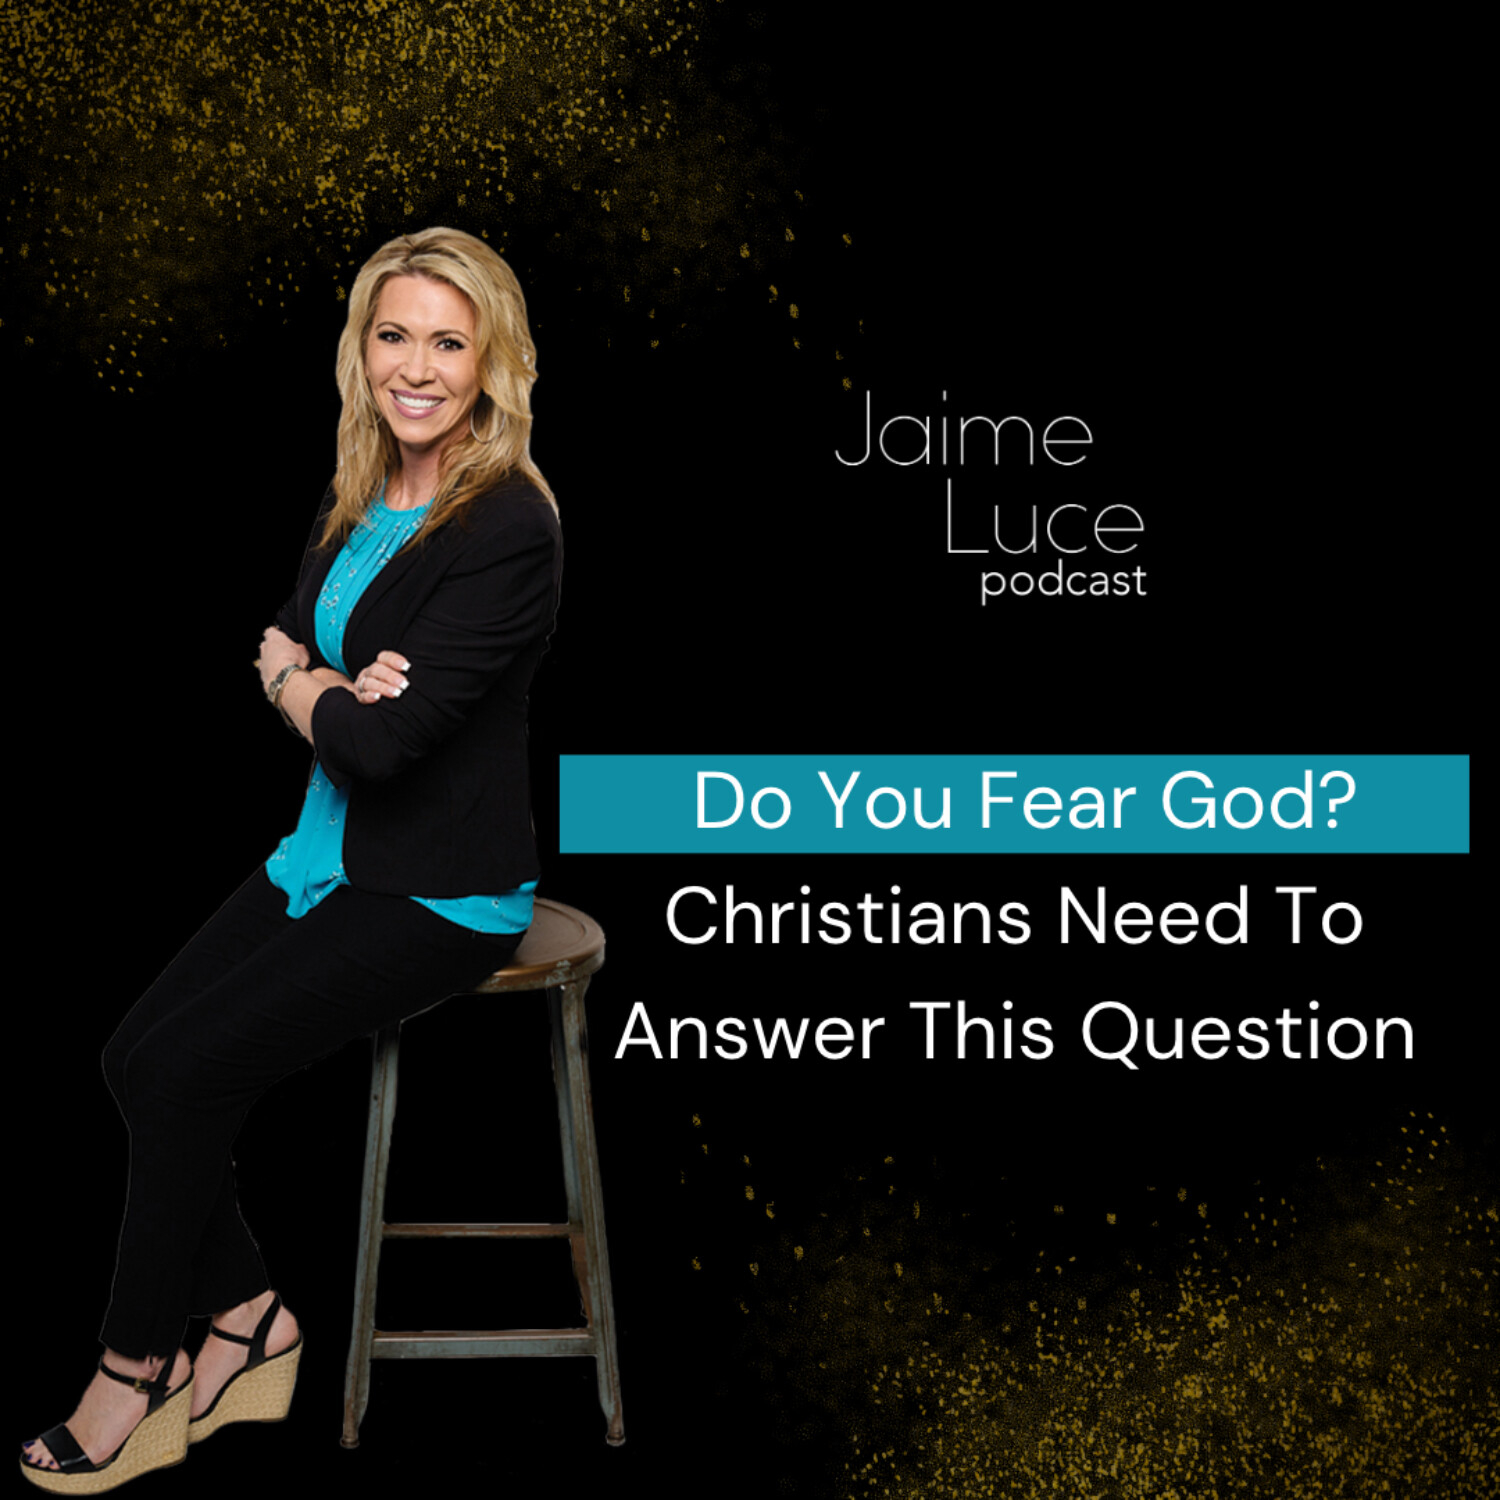 Do You Fear God? Christians Need To Answer This Question